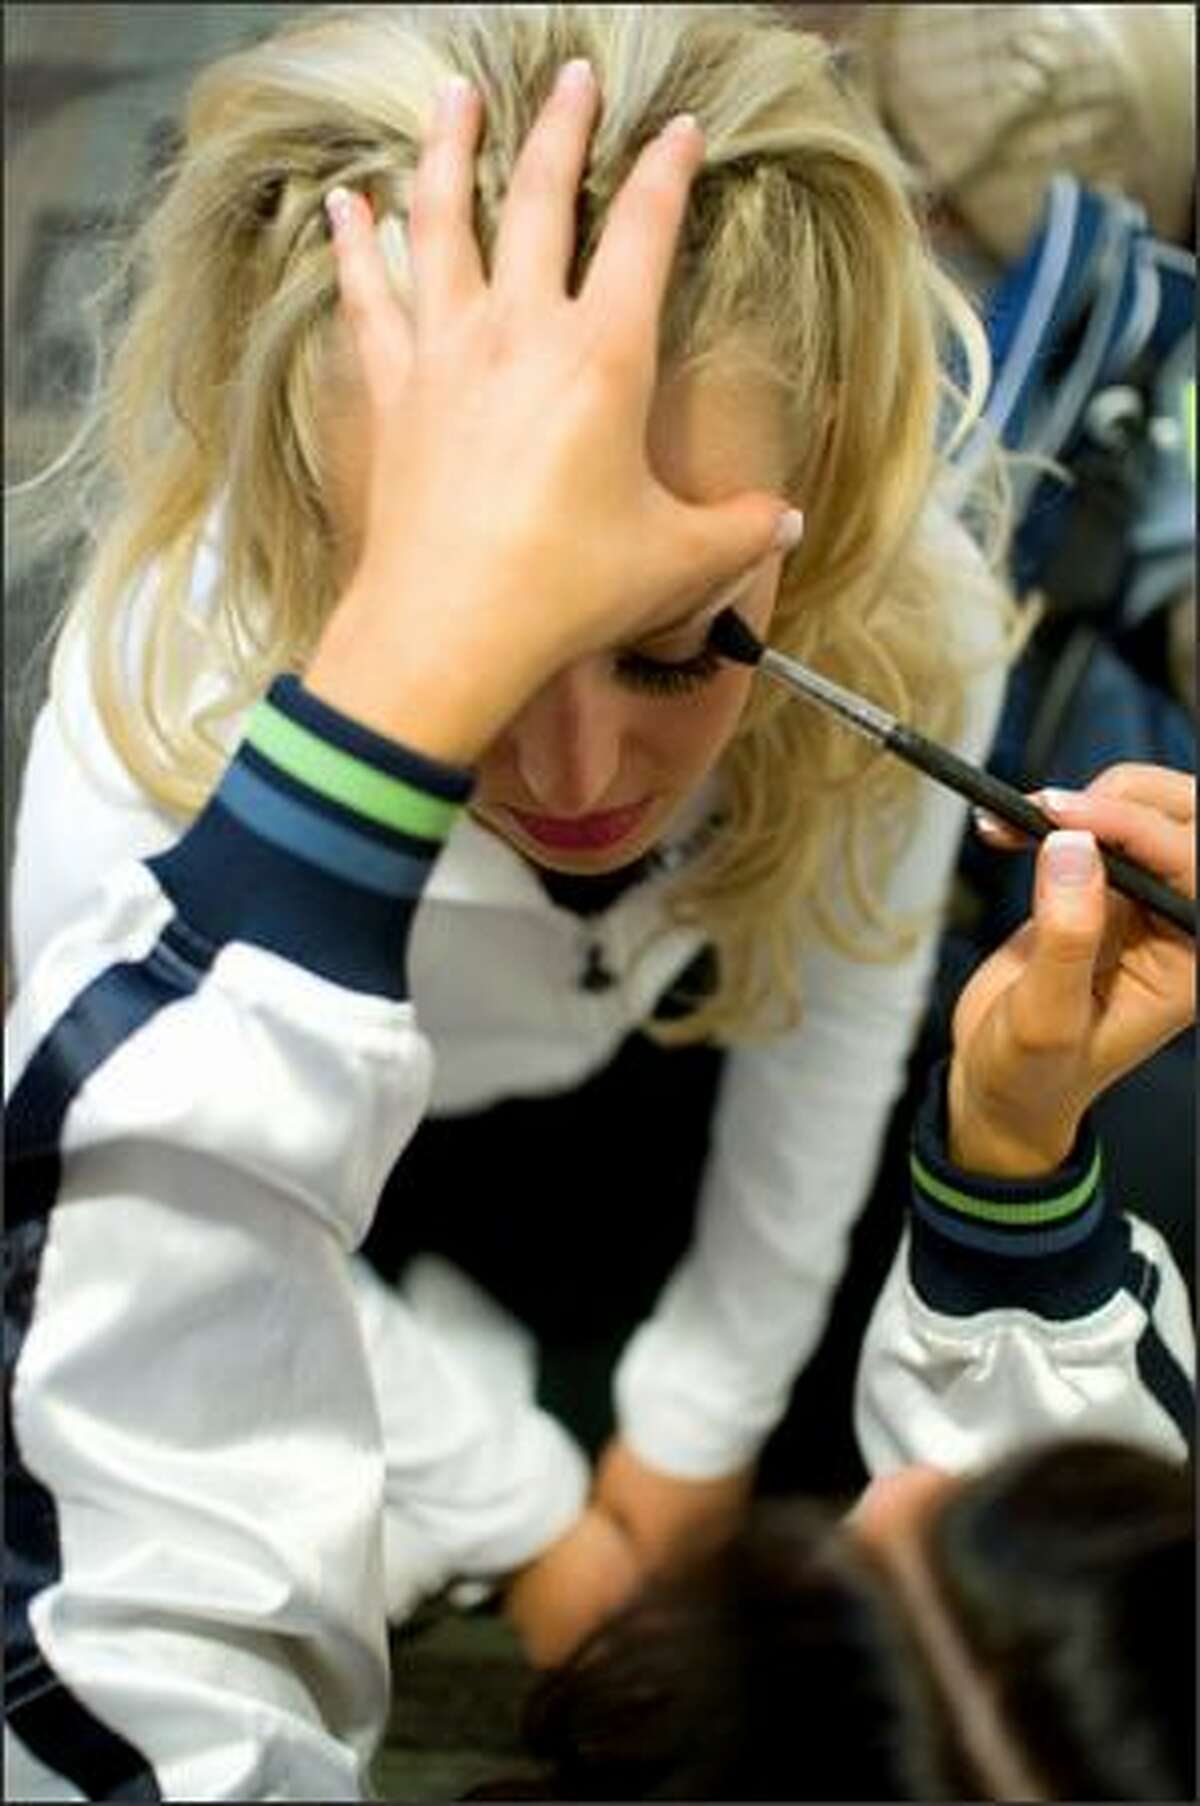 Brittany Wood gets her makeup done with a little help from friend Nicole Perry during final tryouts for the Sea Gals at Qwest Field. (Daniel Berman / Special to SeattlePI.com)